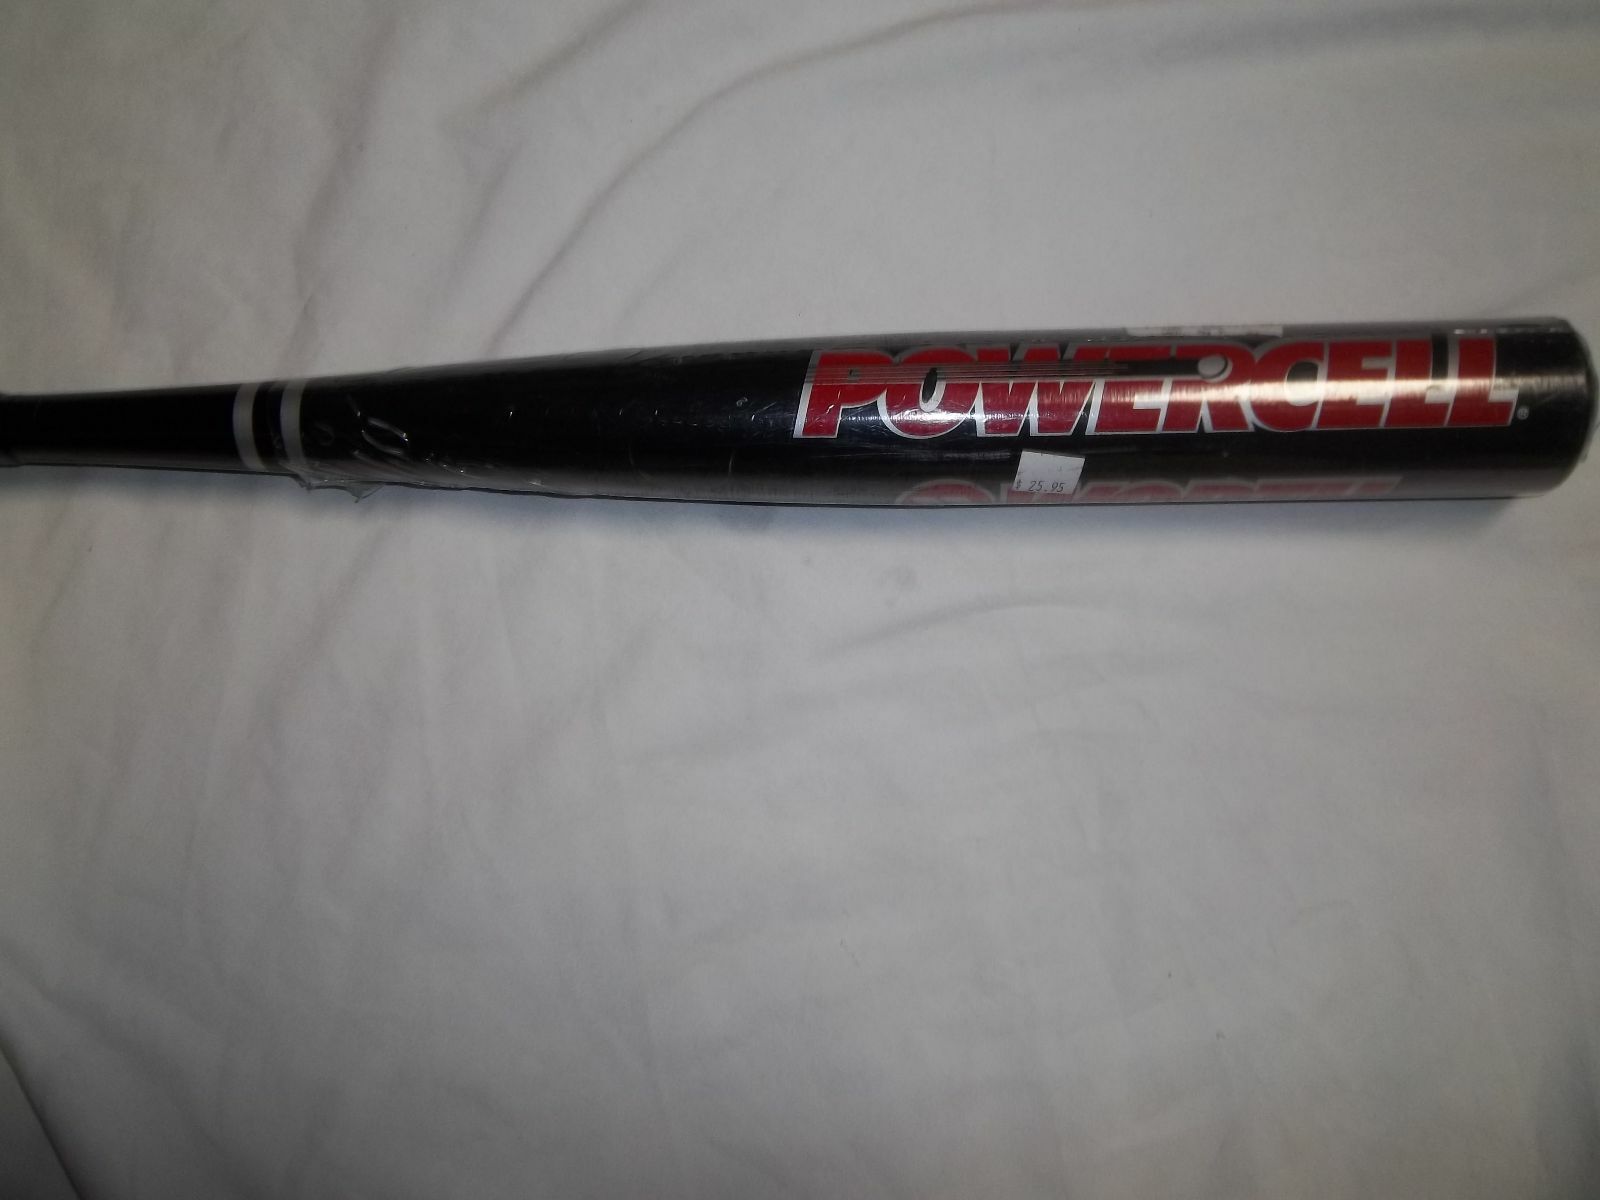 WORTH LW4 POWERCELL YOUTH BASEBALL BAT (SOLID BLACK BARREL) VARIOUS SIZES